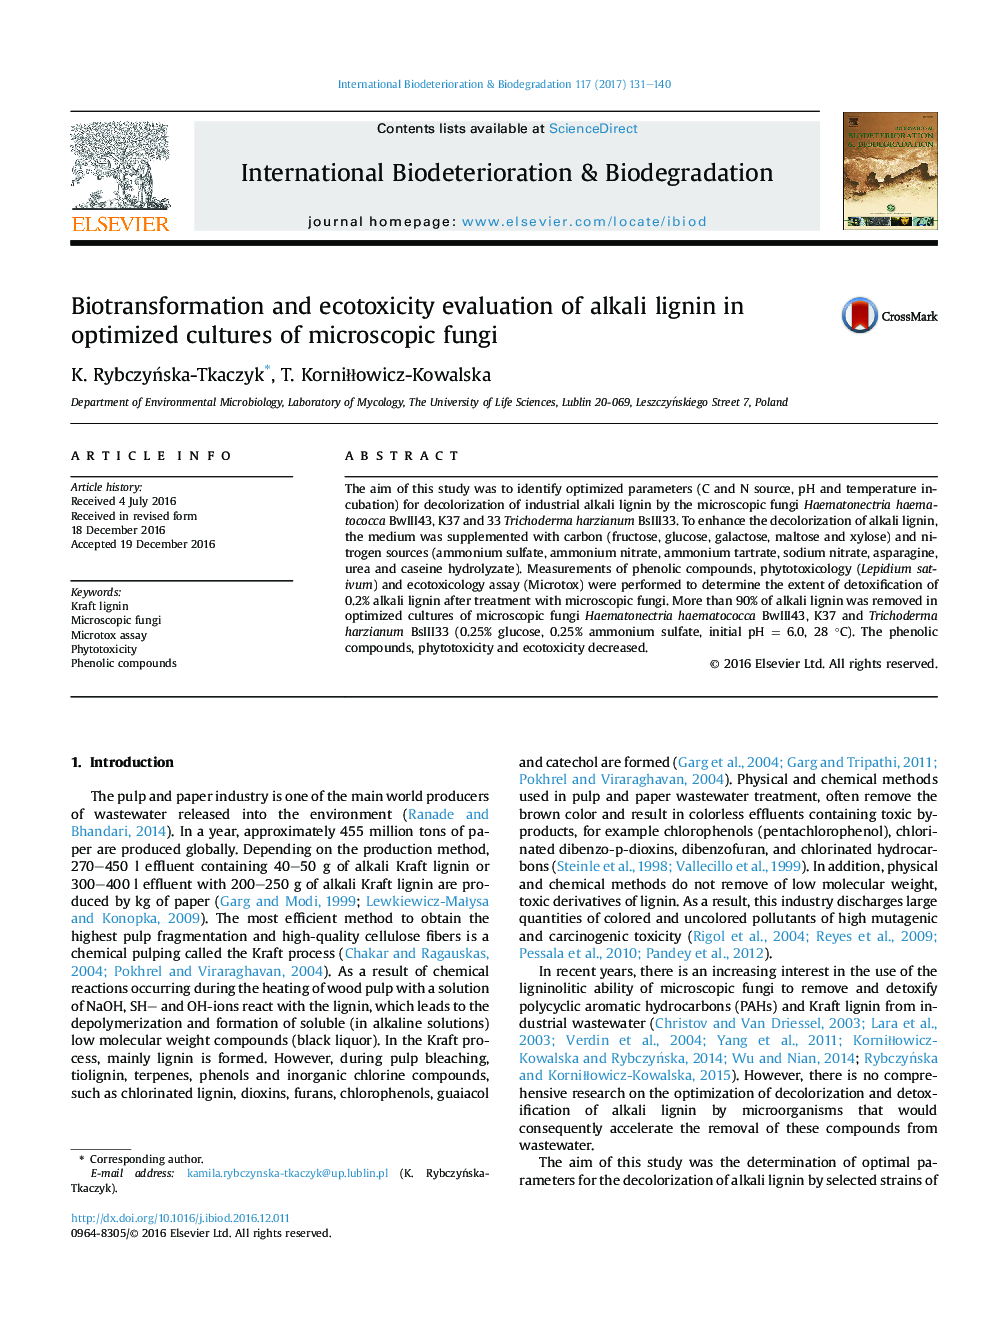 Biotransformation and ecotoxicity evaluation of alkali lignin in optimized cultures of microscopic fungi